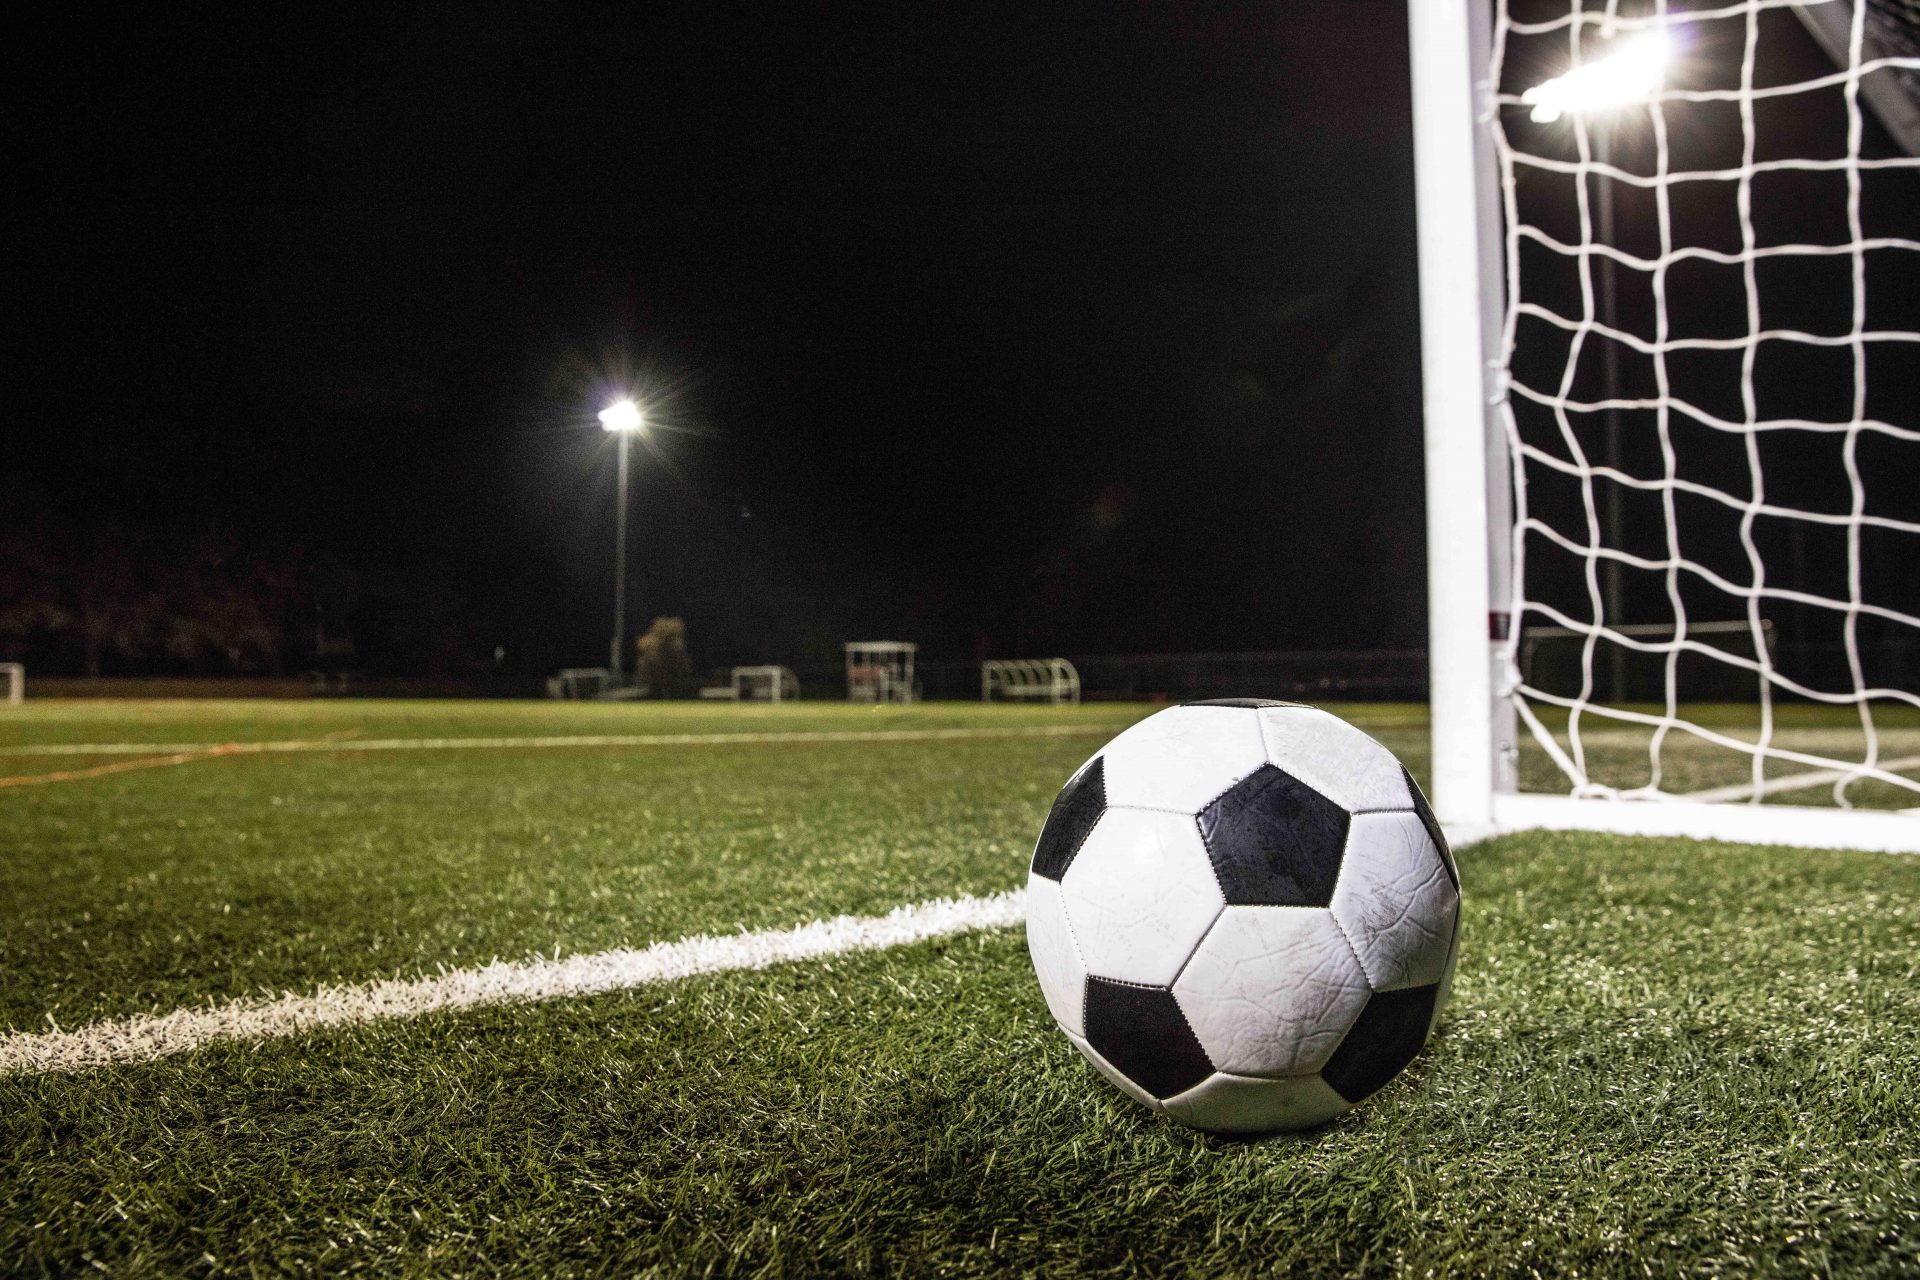 Soccer Goal Safety Tips for Artificial Turf Sports Fields